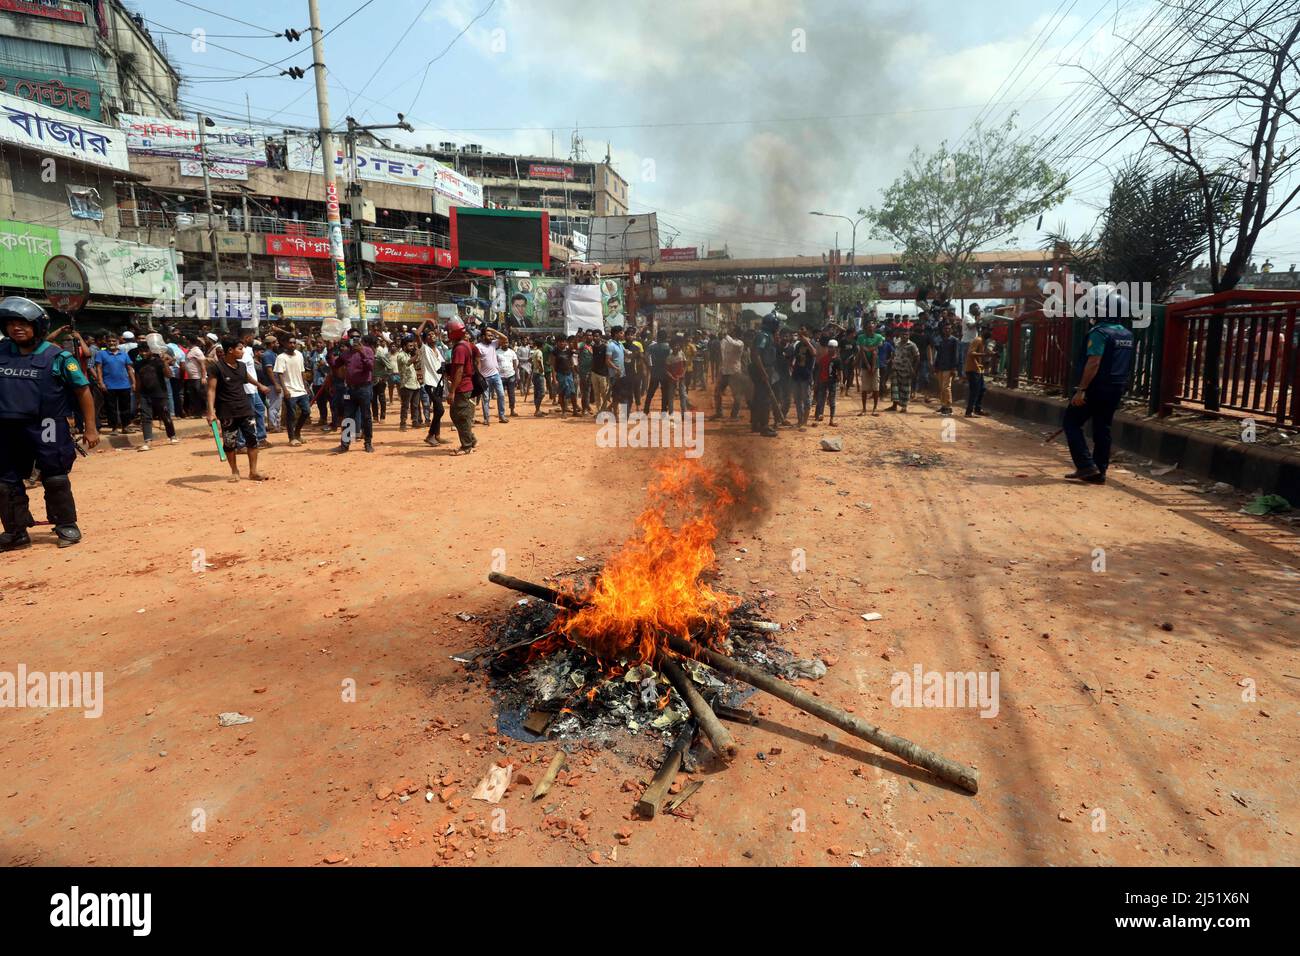 Police gather use tear gas shells to disperse students from Dhaka college after they clashed with the New Market traders in Dhaka on April 19, 2022. Photo by Habibur Rahman/ABACAPRESS.COM Credit: Abaca Press/Alamy Live News Stock Photo